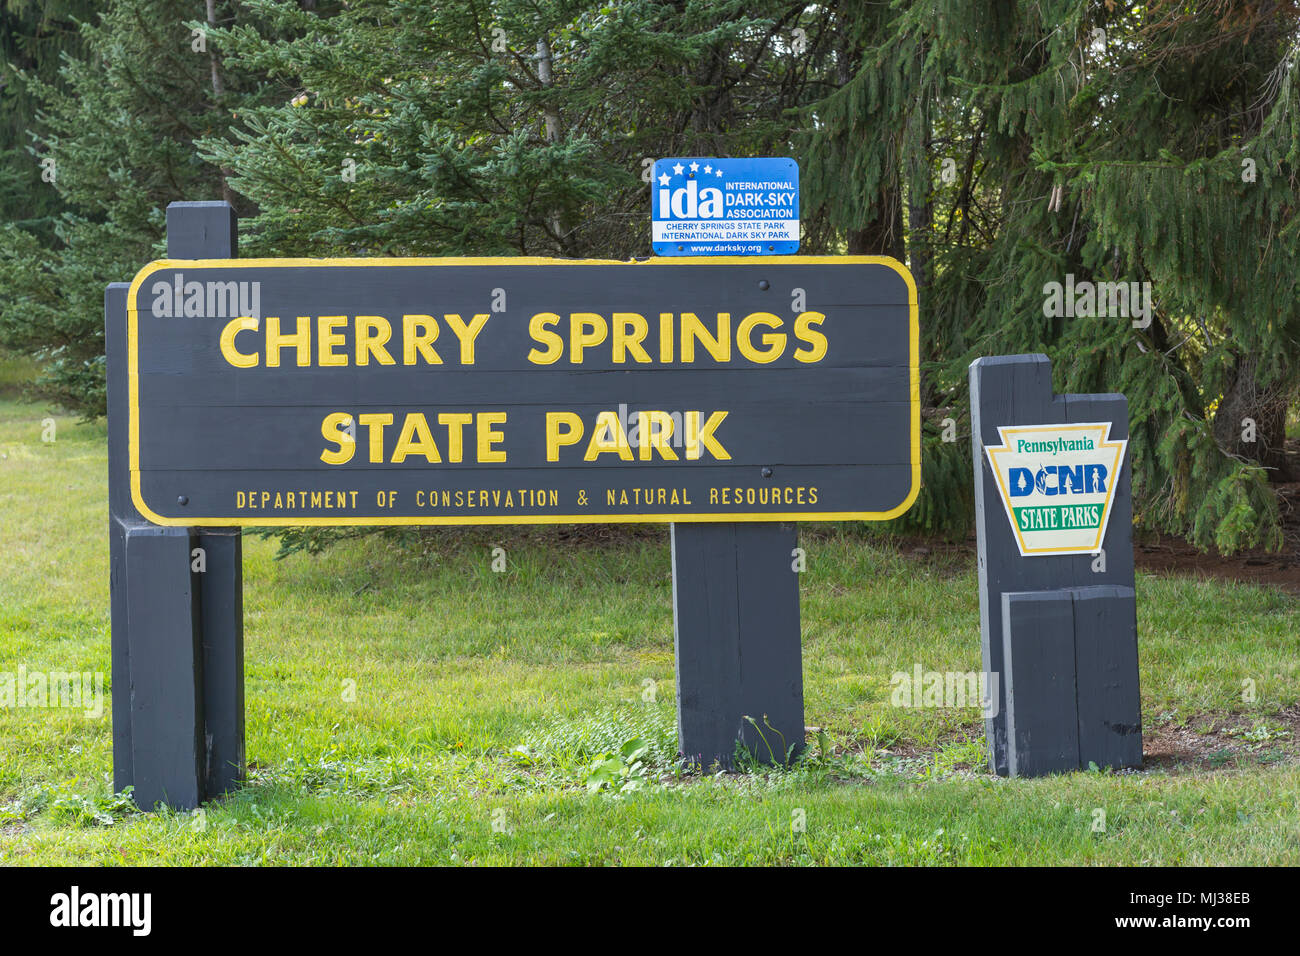 Signs at the entrance to the astronomy field at Cherry Springs State Park, an International Dark Sky Park in central Pennsylvania. Stock Photo